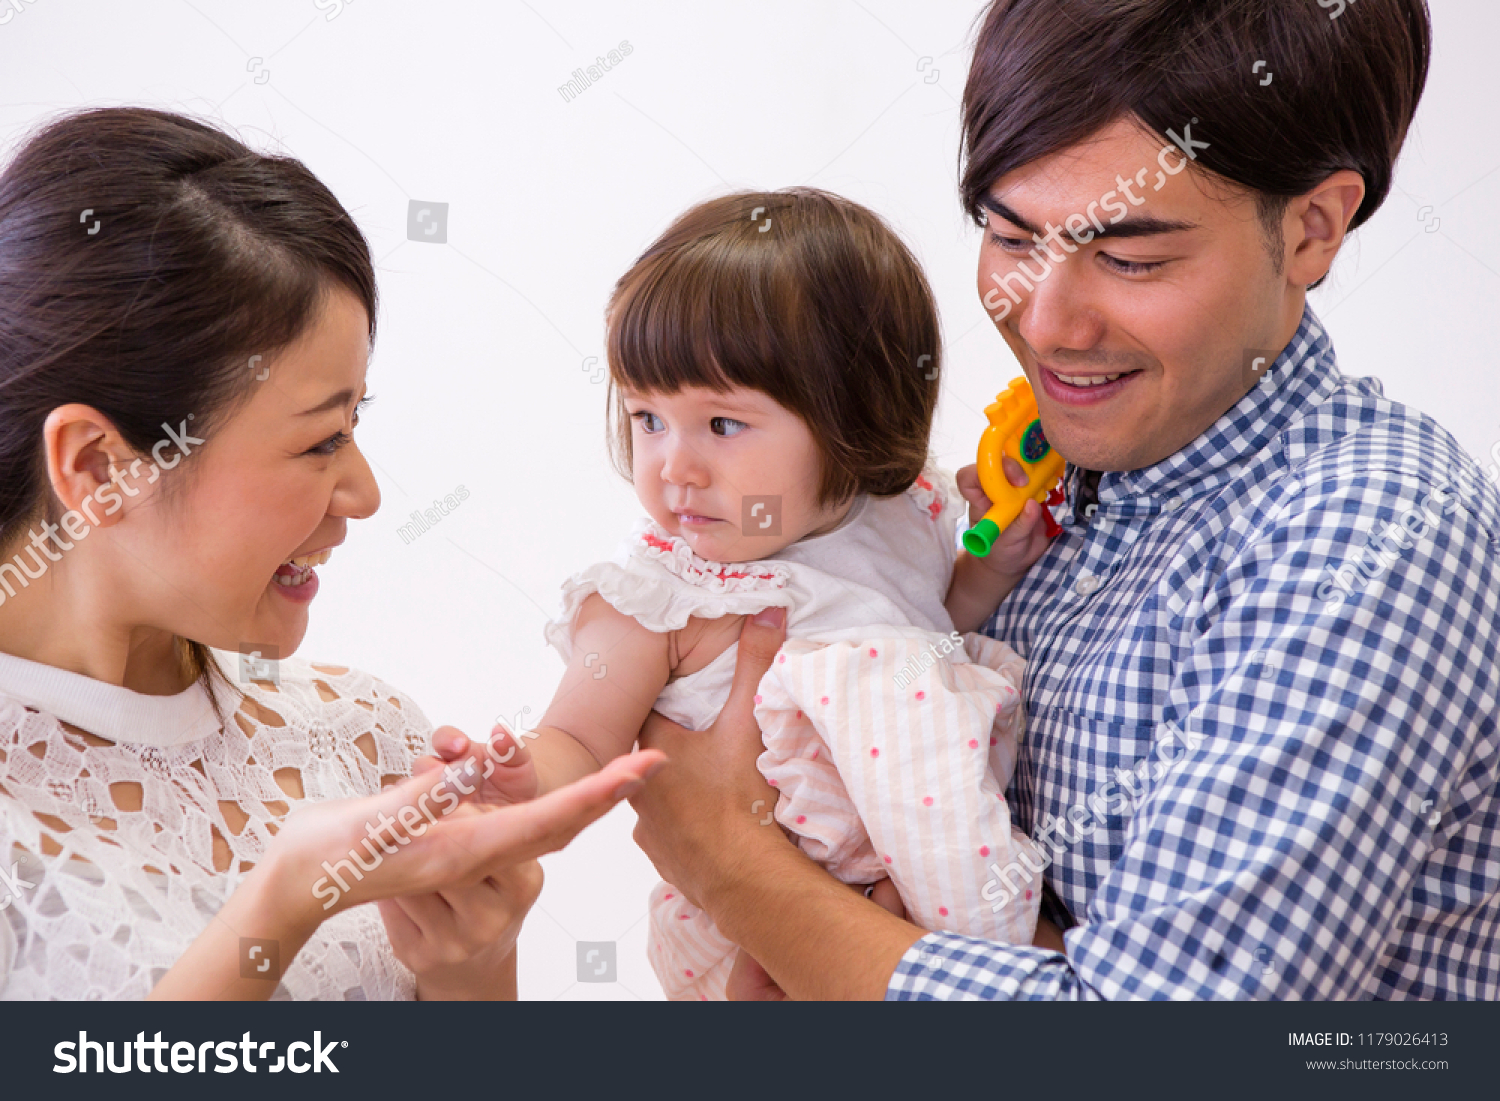 The girl who is held in their arm by parents #1179026413